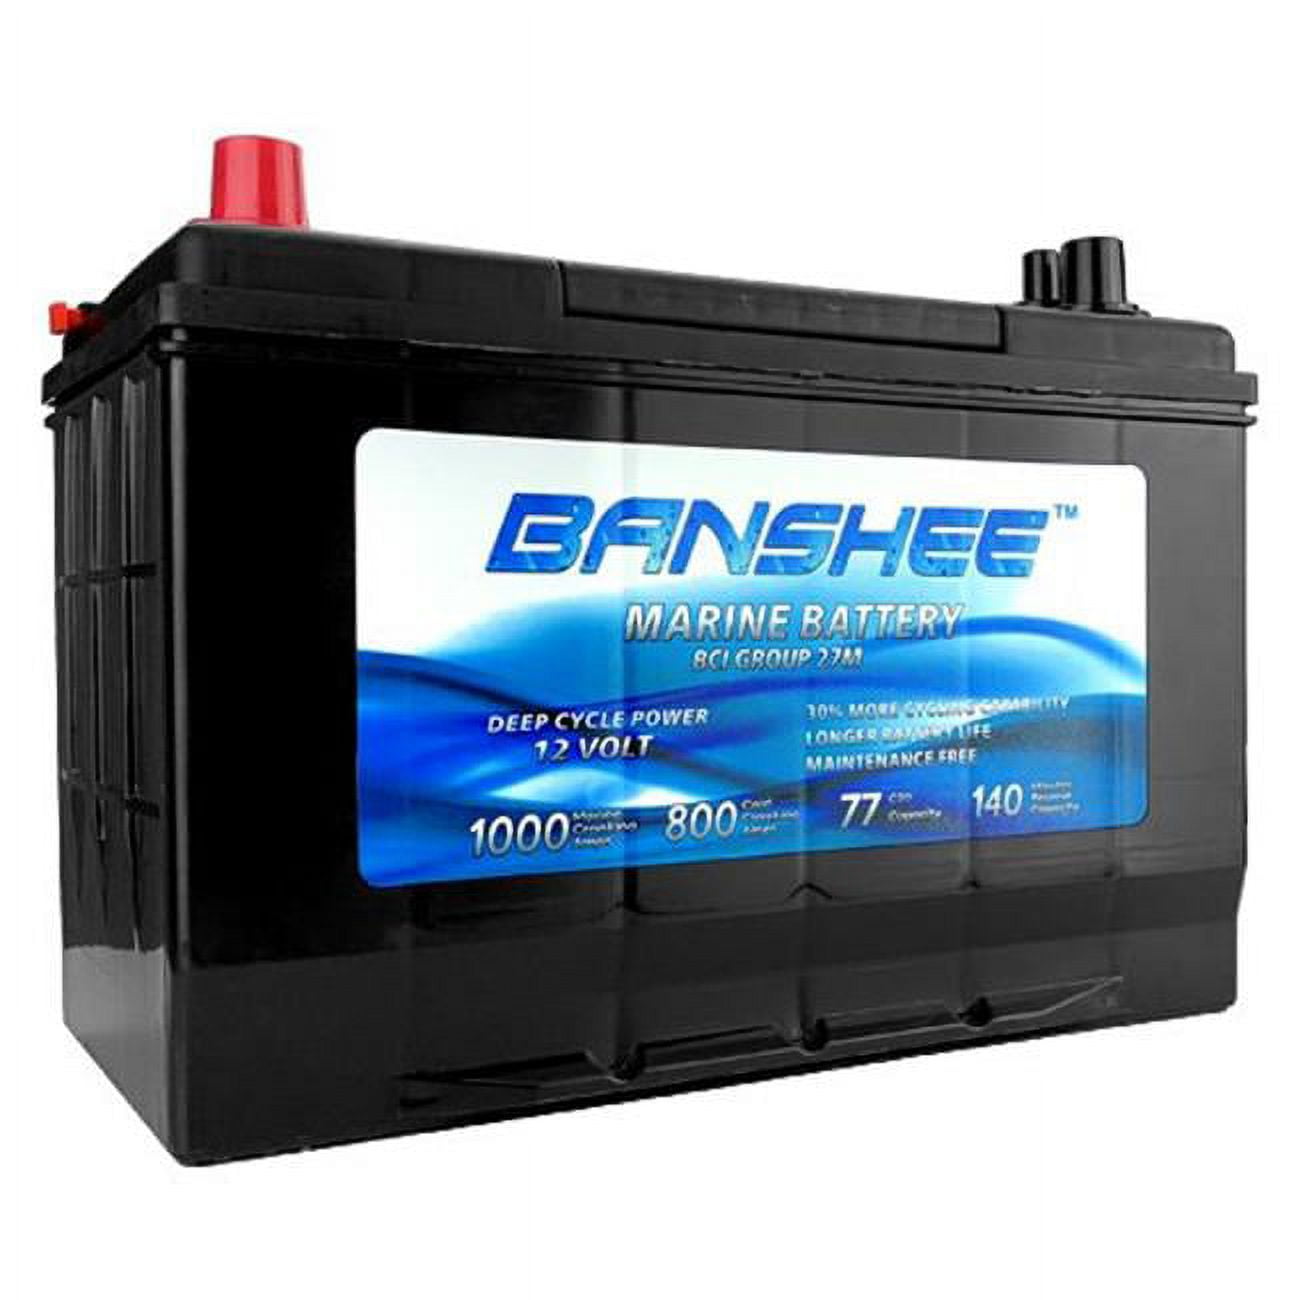 Picture of Banshee 27M-Banshee-ARR-SHIP 12V Deep Cycle Marine Battery for Replacement Optima D27M 8027-127 - Group Size 27